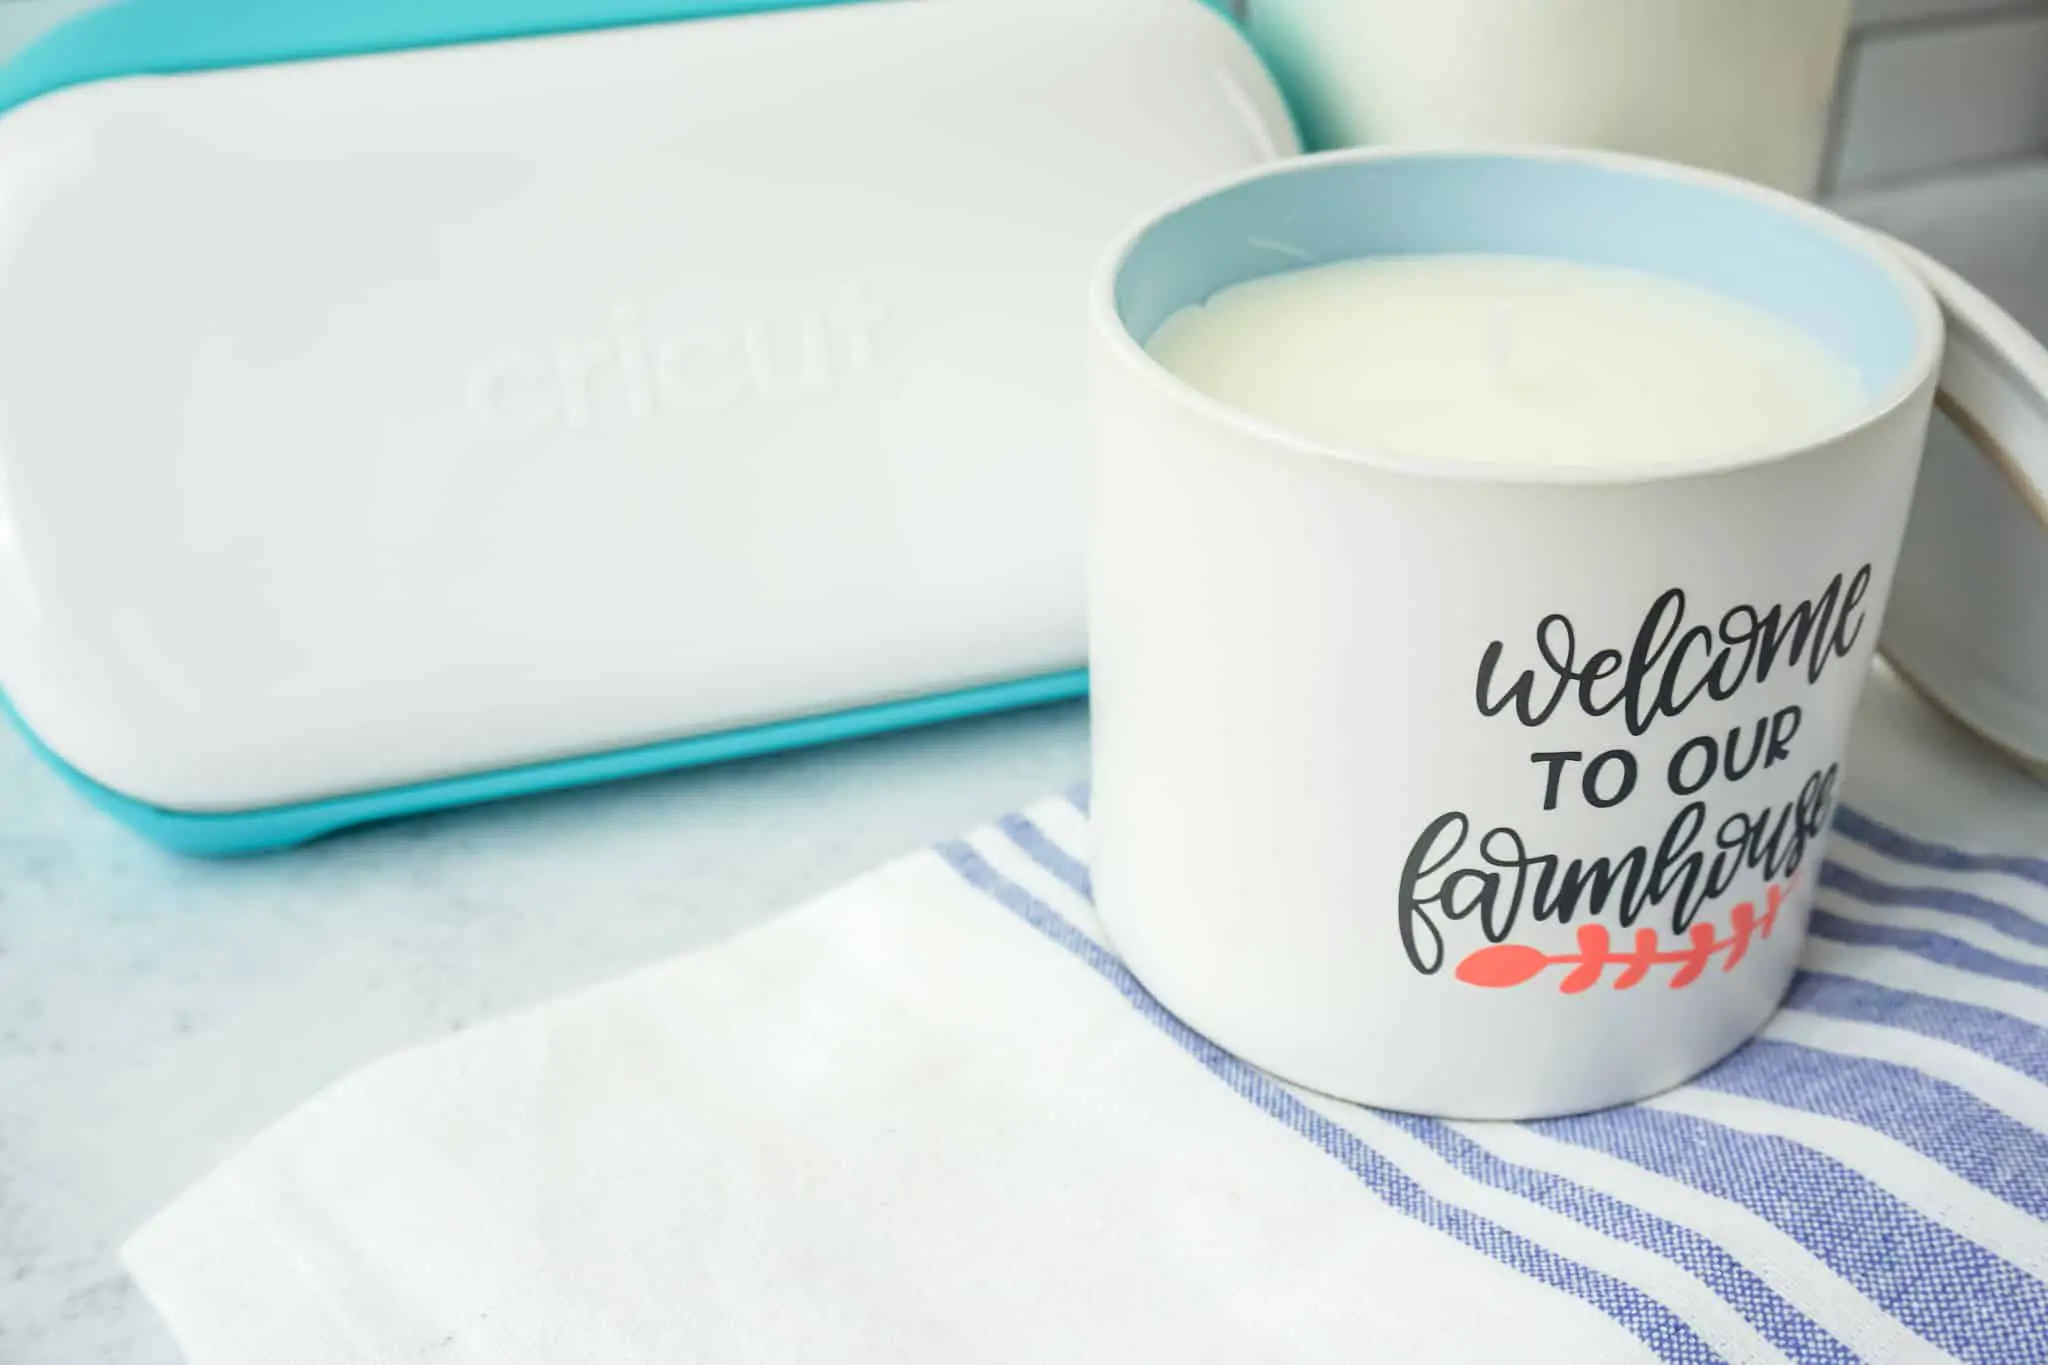 Use The Cricut Joy To Decorate Items You Already Have In Your Home